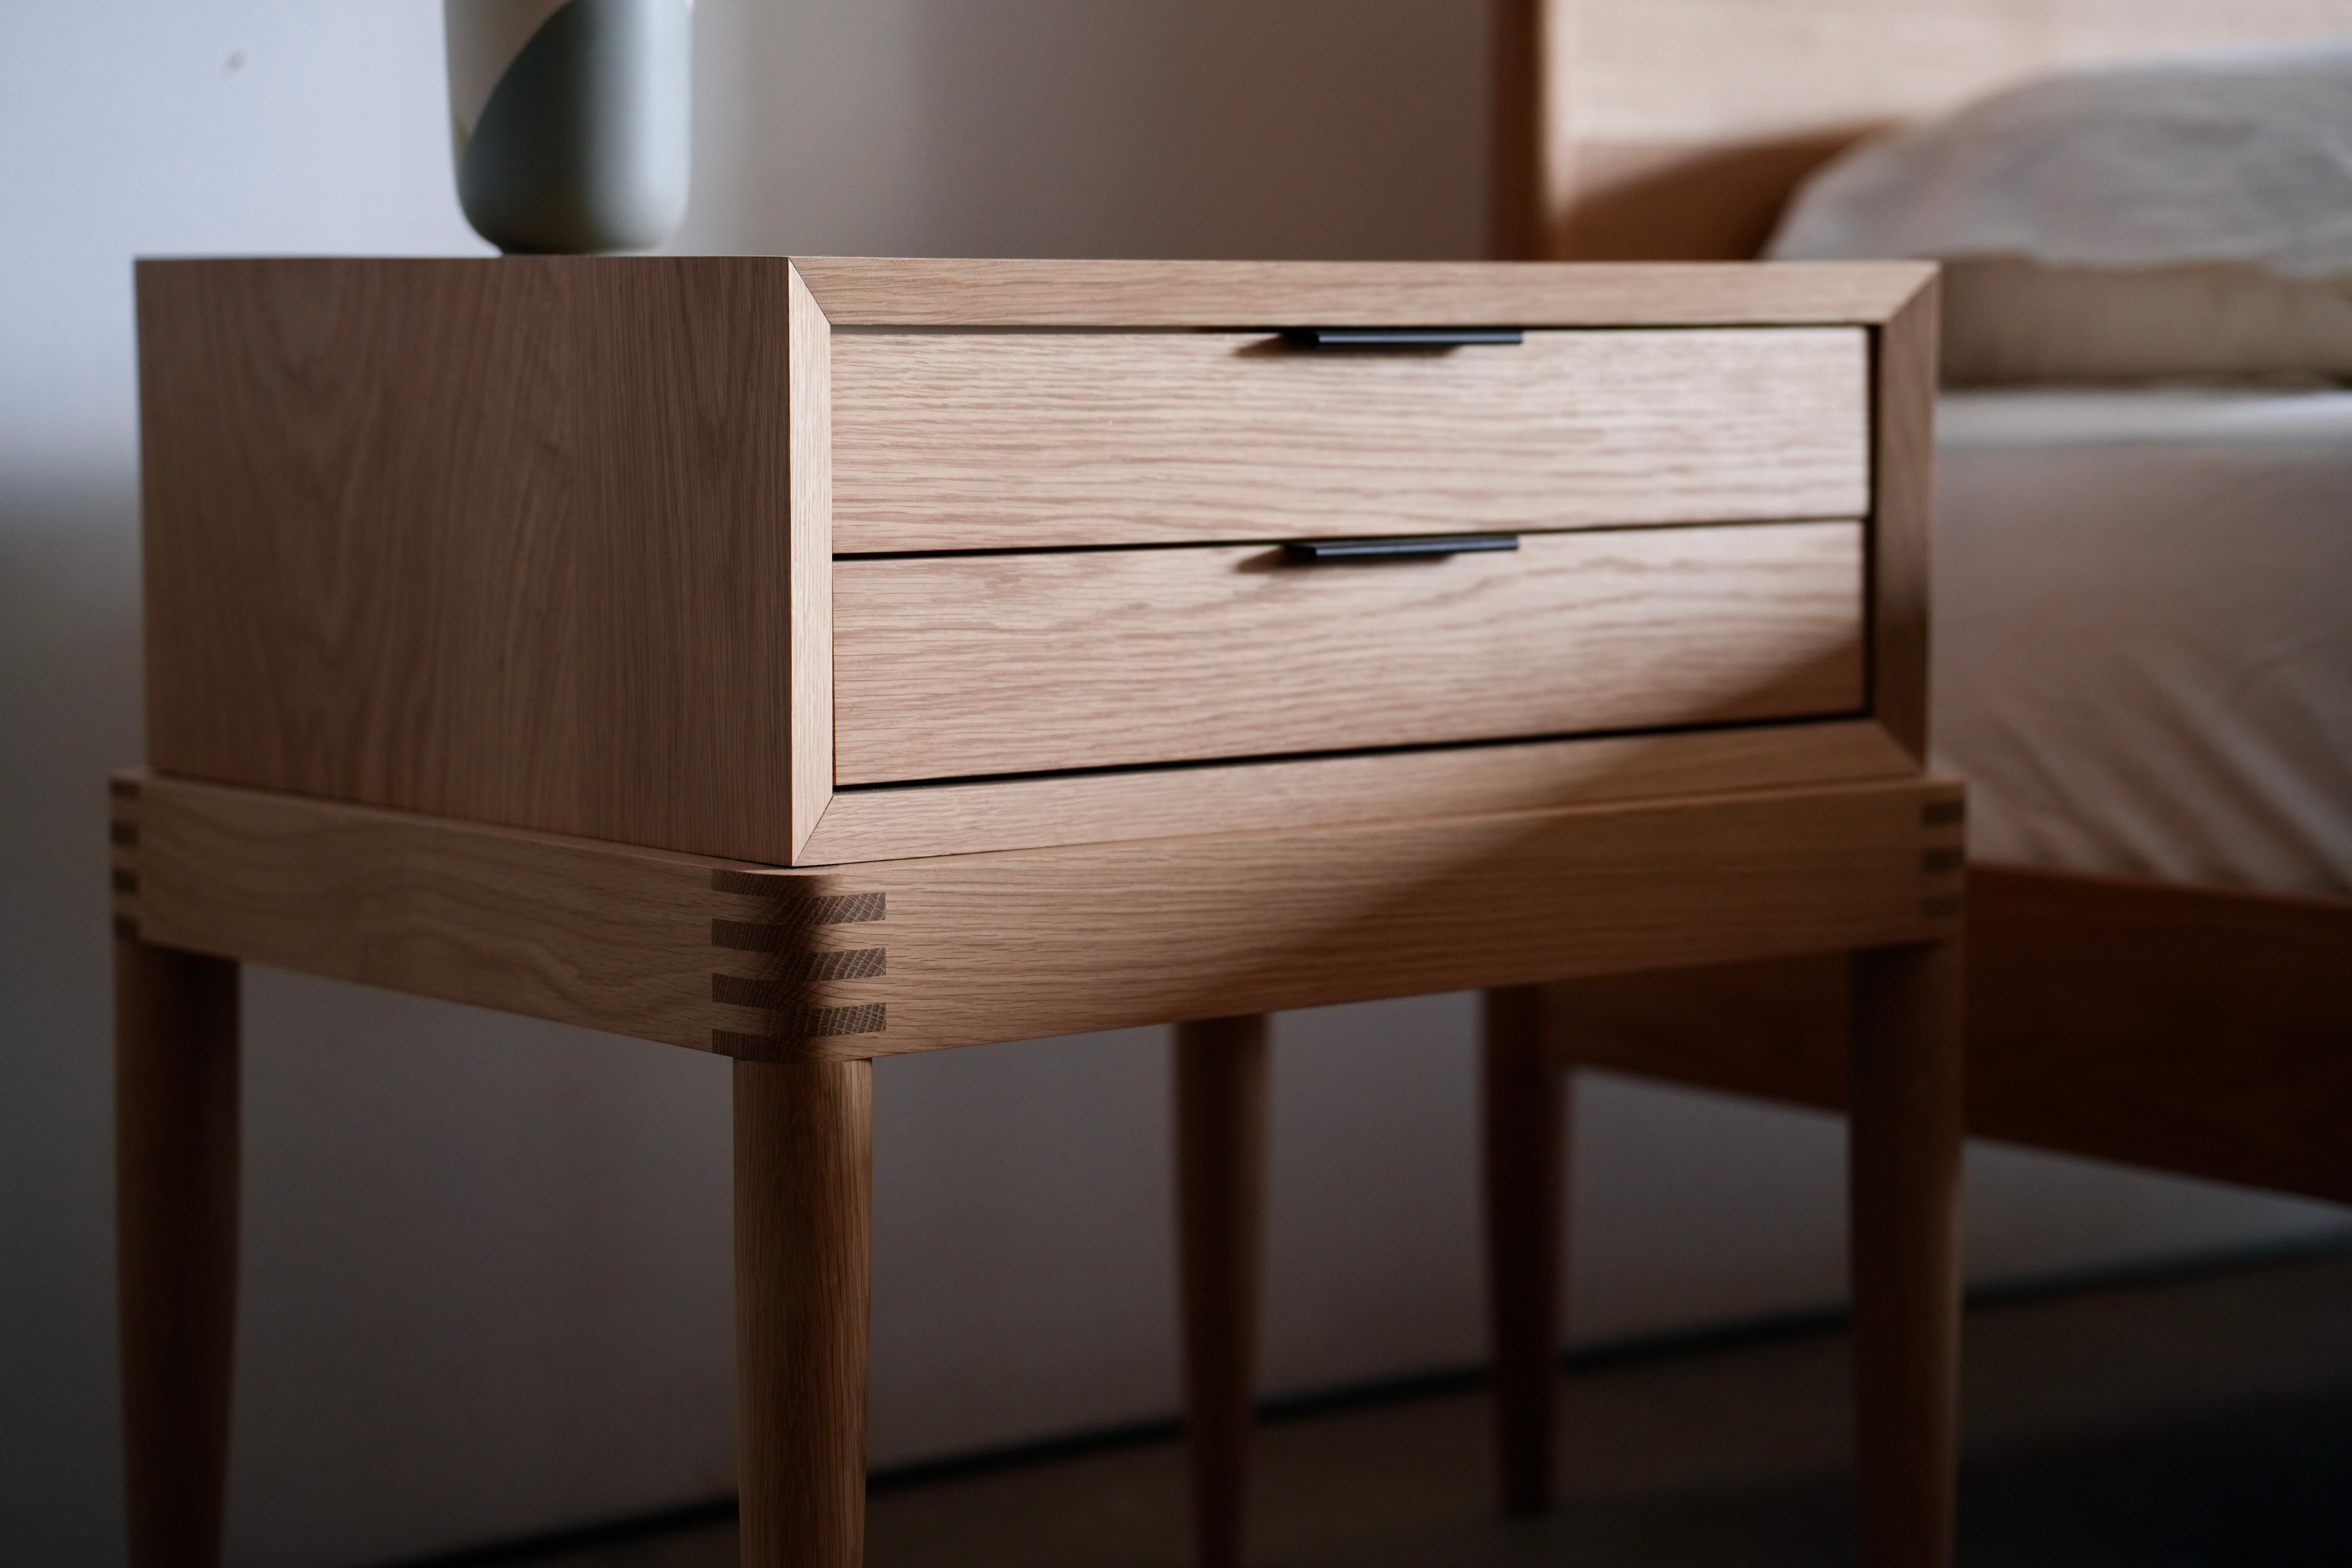 Side Table No. 4

Designed to showcase the details of the joinery and wood, this side table fits perfectly with our dresser No.4 and Bed No. 3 & No. 5.

The drawers can be made with push to open hardware so as to not interrupt the flow of the grain